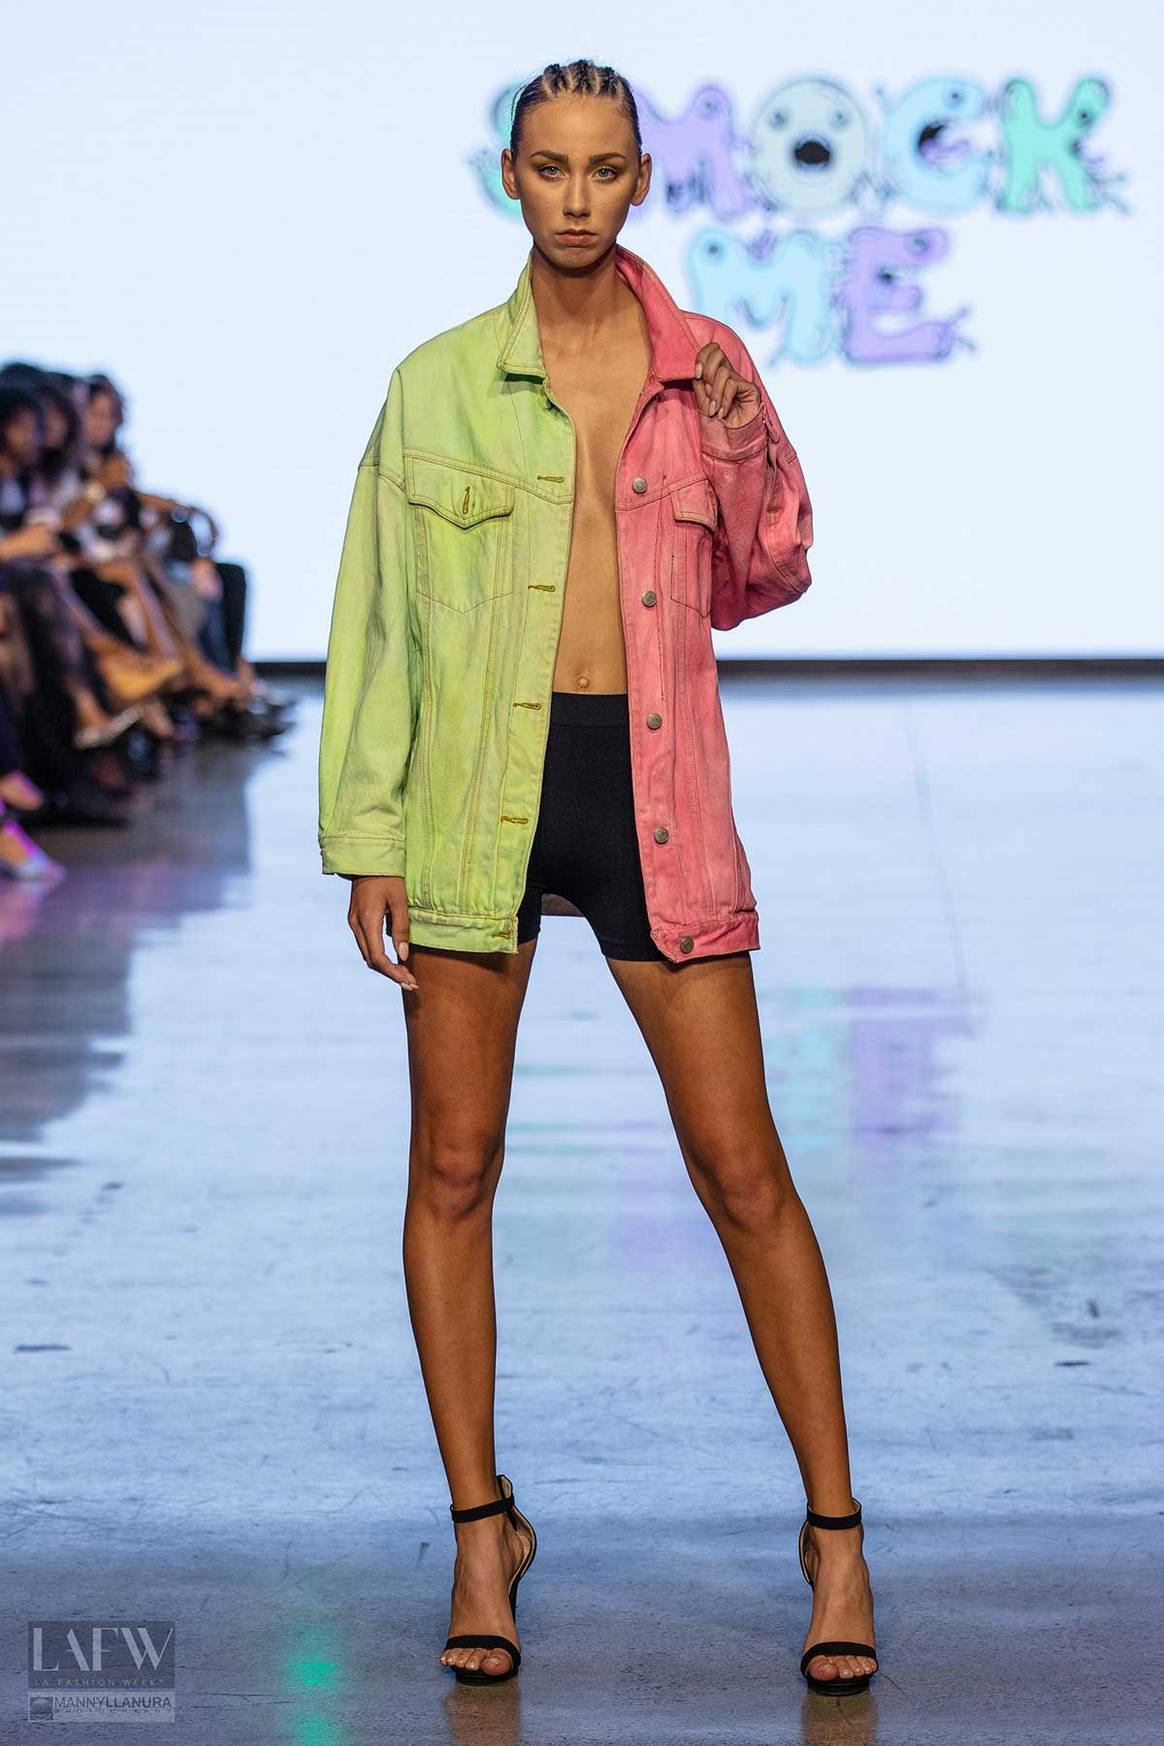 Los Angeles Fashion Week dedicates itself to emerging designers from